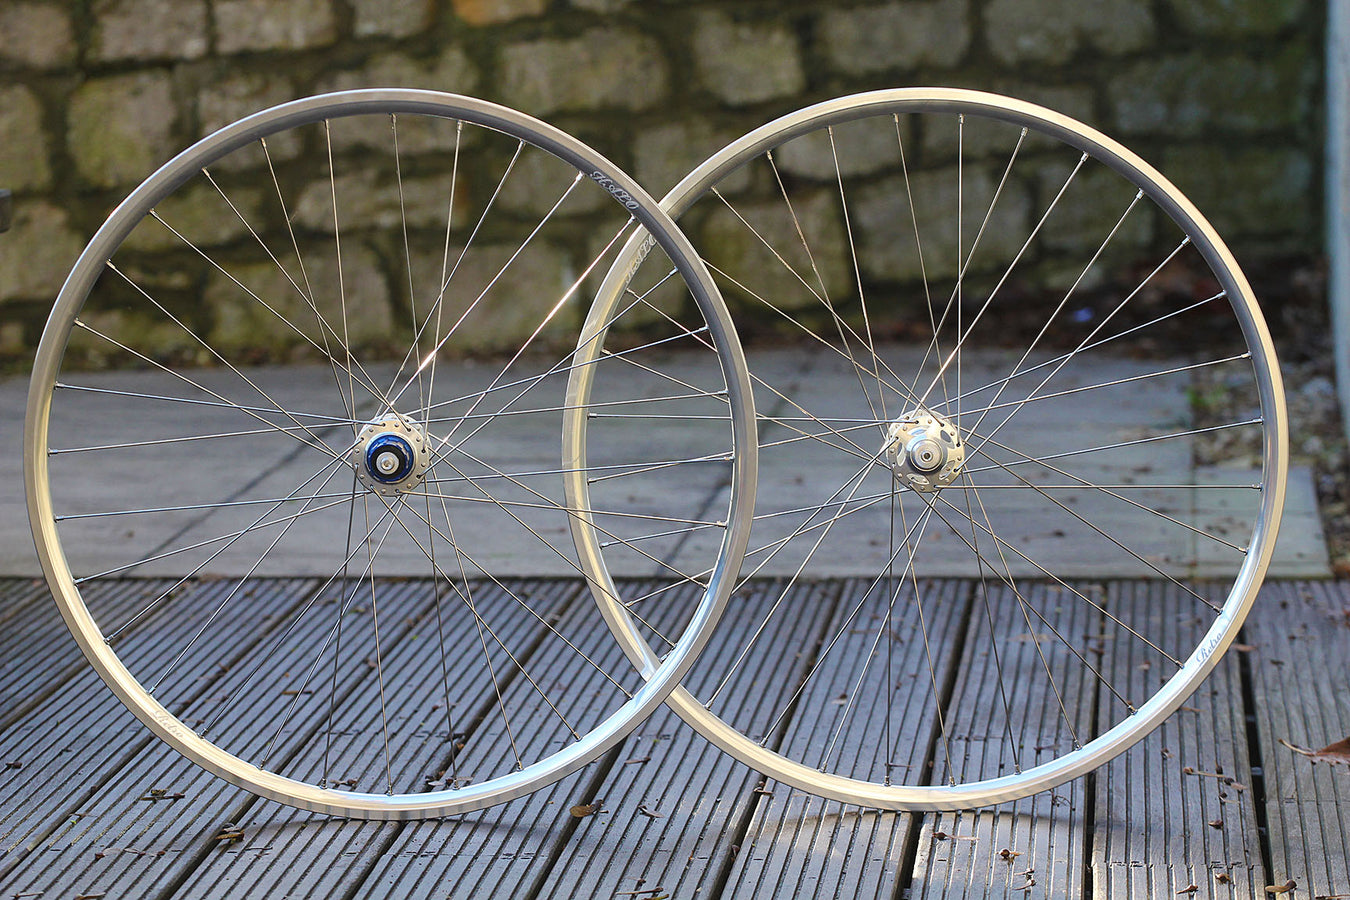 Close-up of bicycle wheels which are displayed on a wooden surface